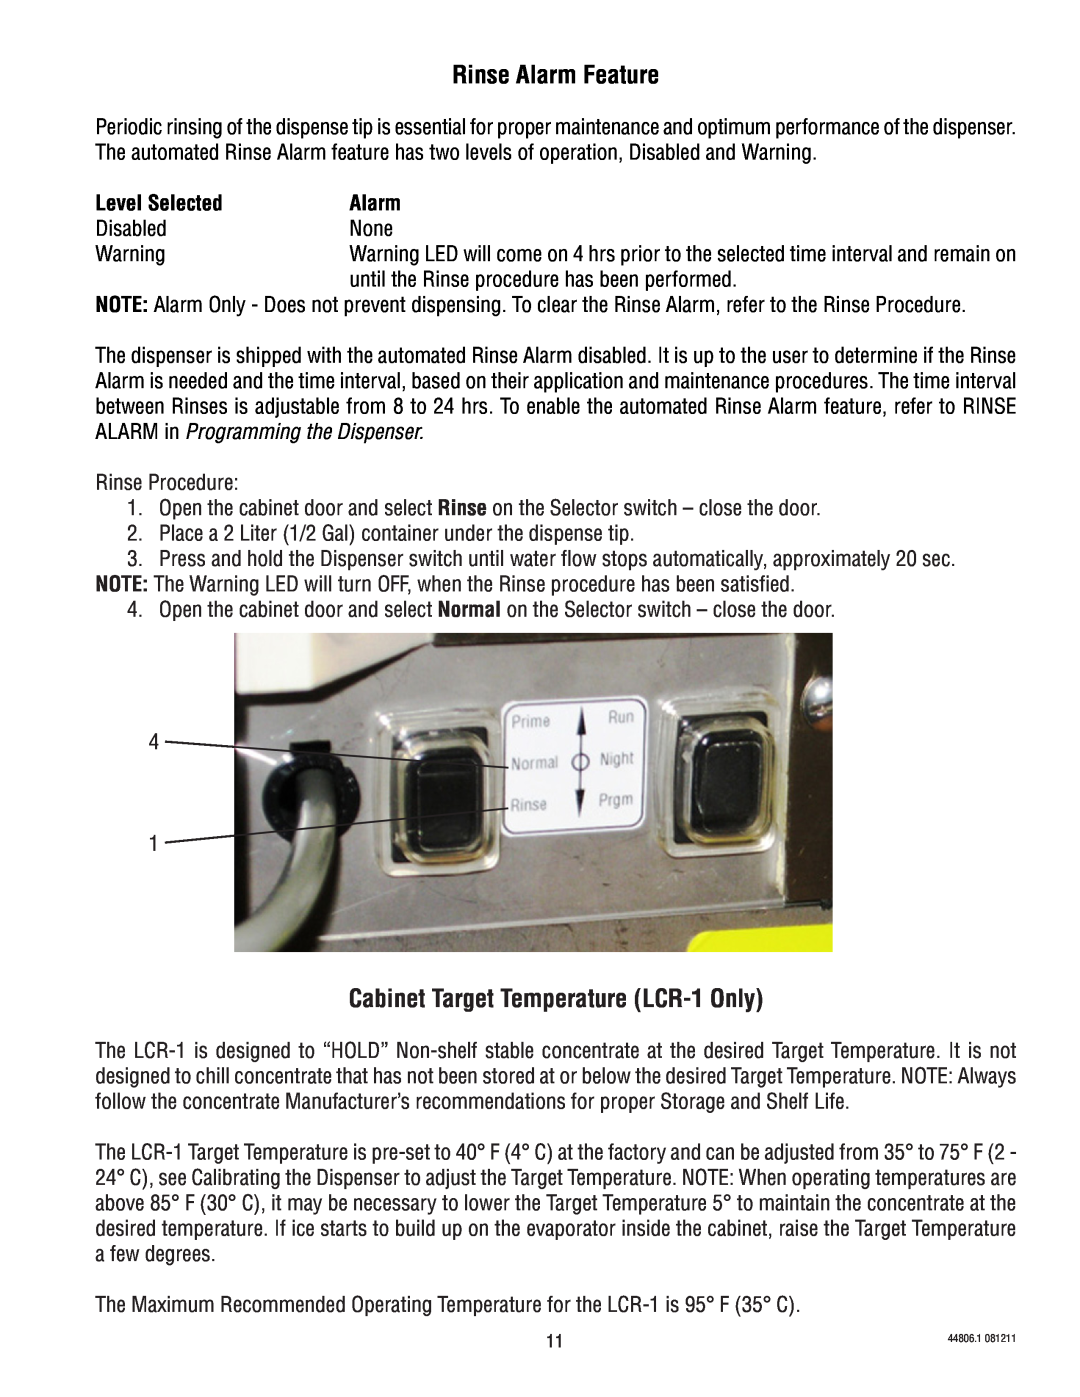 Bunn LCA-1 service manual Rinse Alarm Feature, Cabinet Target Temperature LCR-1 Only, Level Selected 